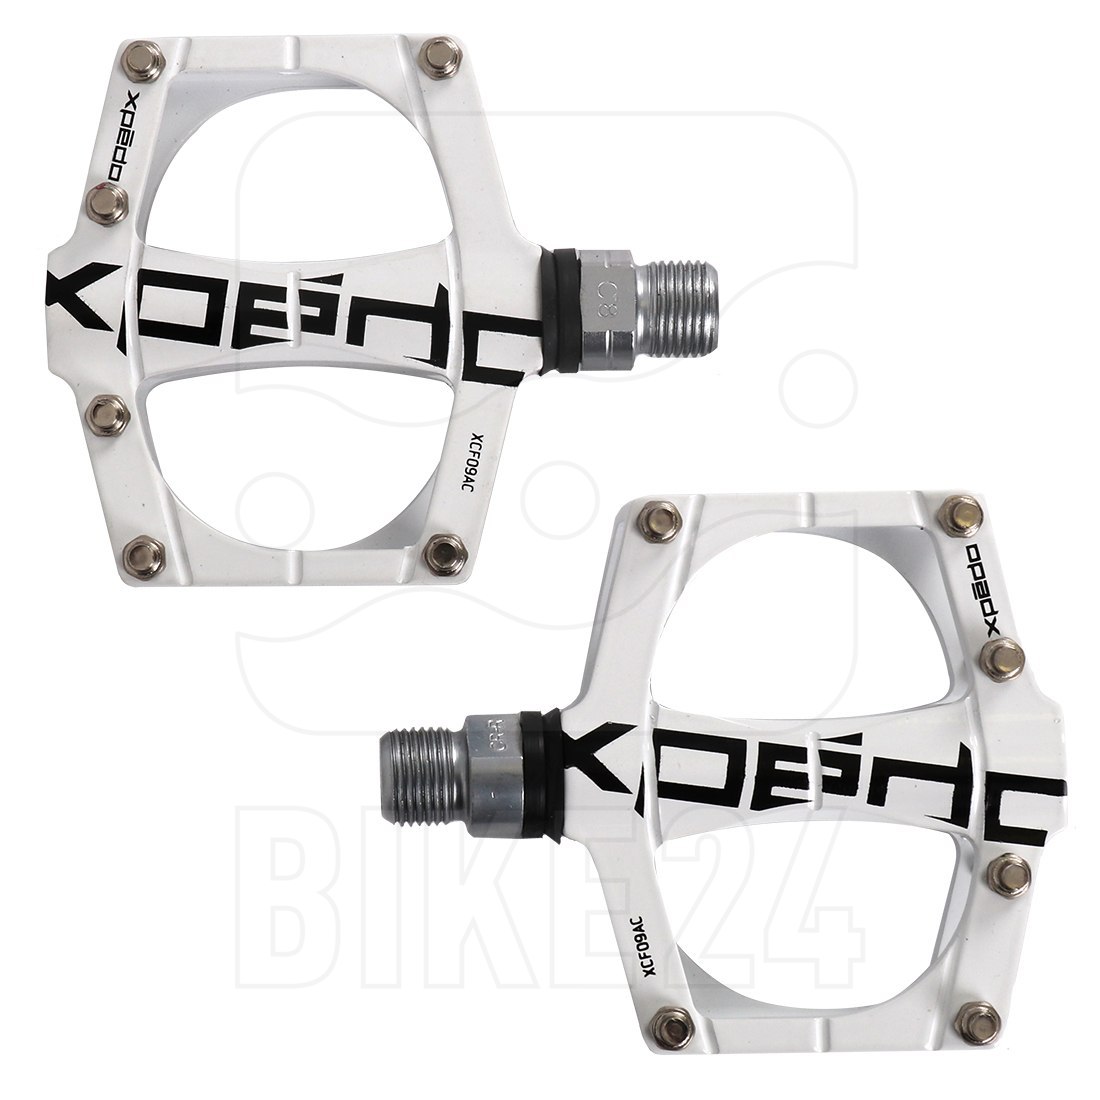 Picture of Xpedo TRVS 9 Pedals - white